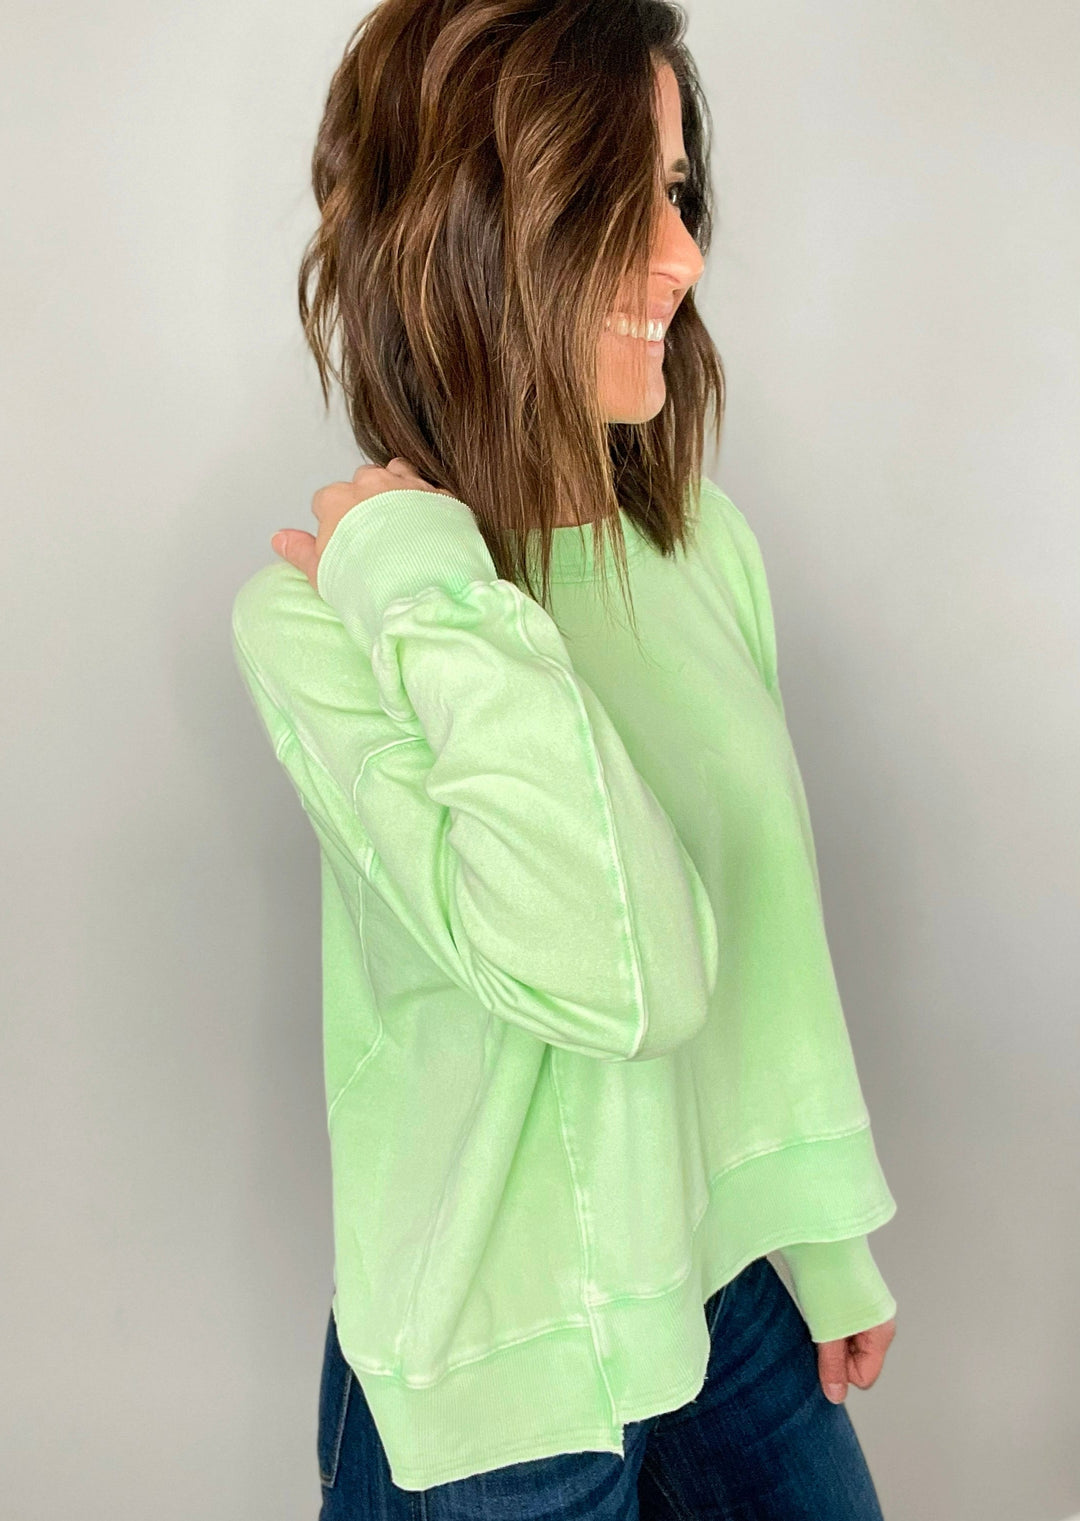 Mineral Washed Mint Lime Green Pullover | Cozy Spring Women's Pullover Sweatshirt